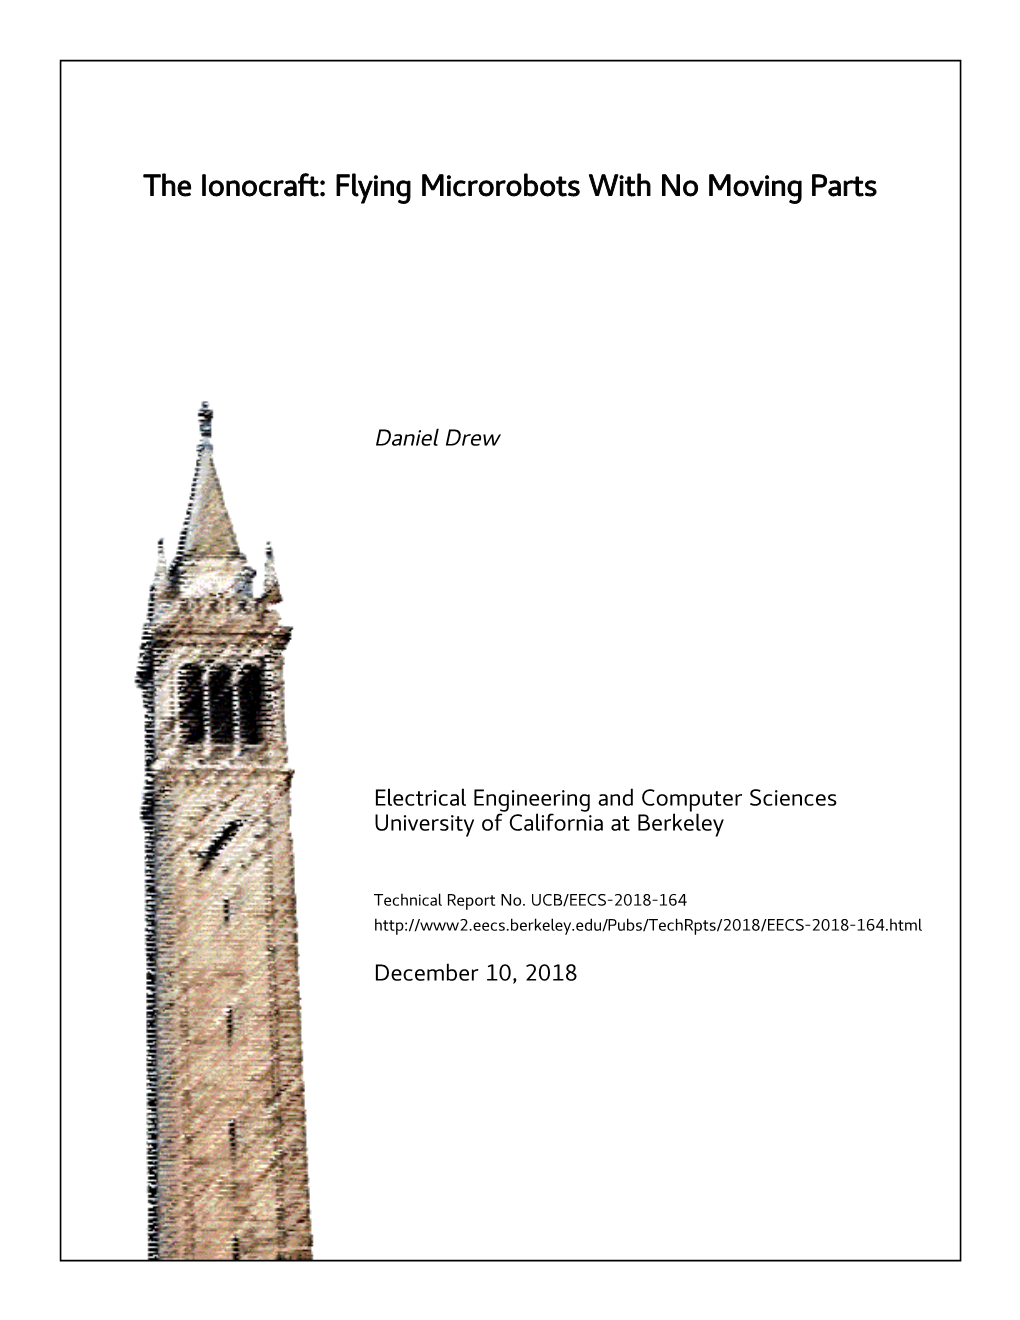 The Ionocraft: Flying Microrobots with No Moving Parts